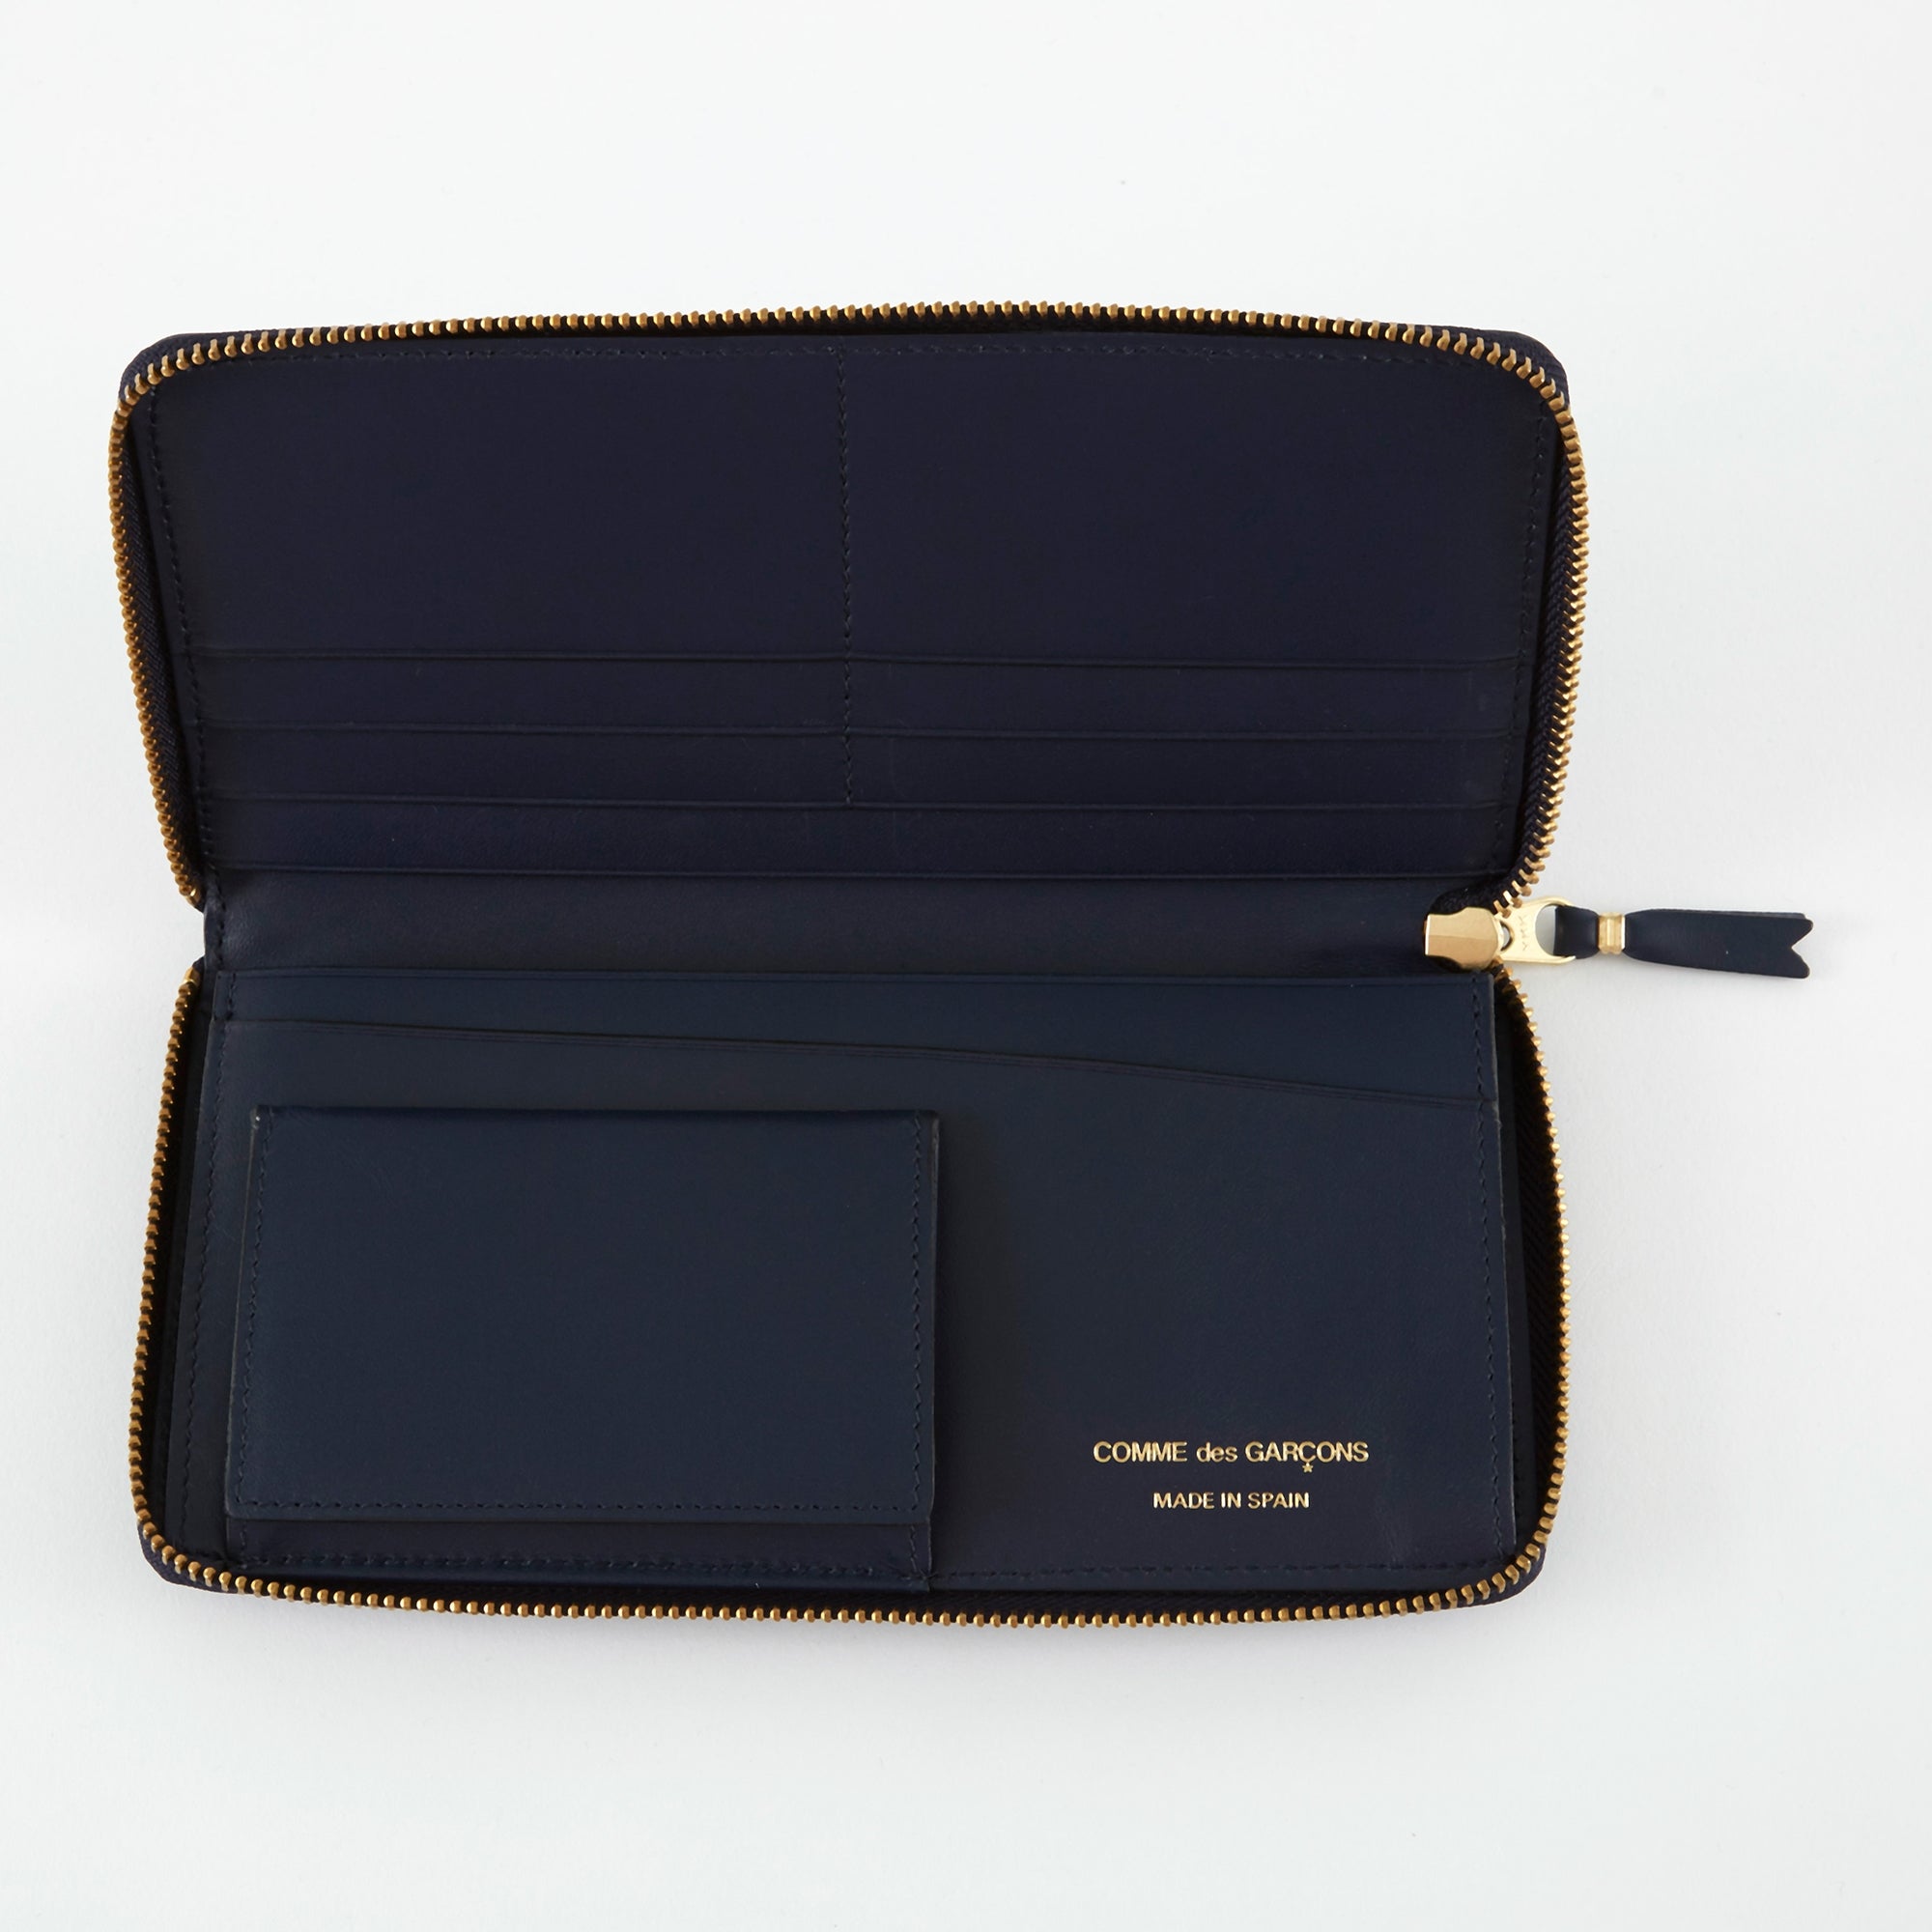 Comme des Garcons Wallets Classic Leather (SA0110) - Navy | Goodhood